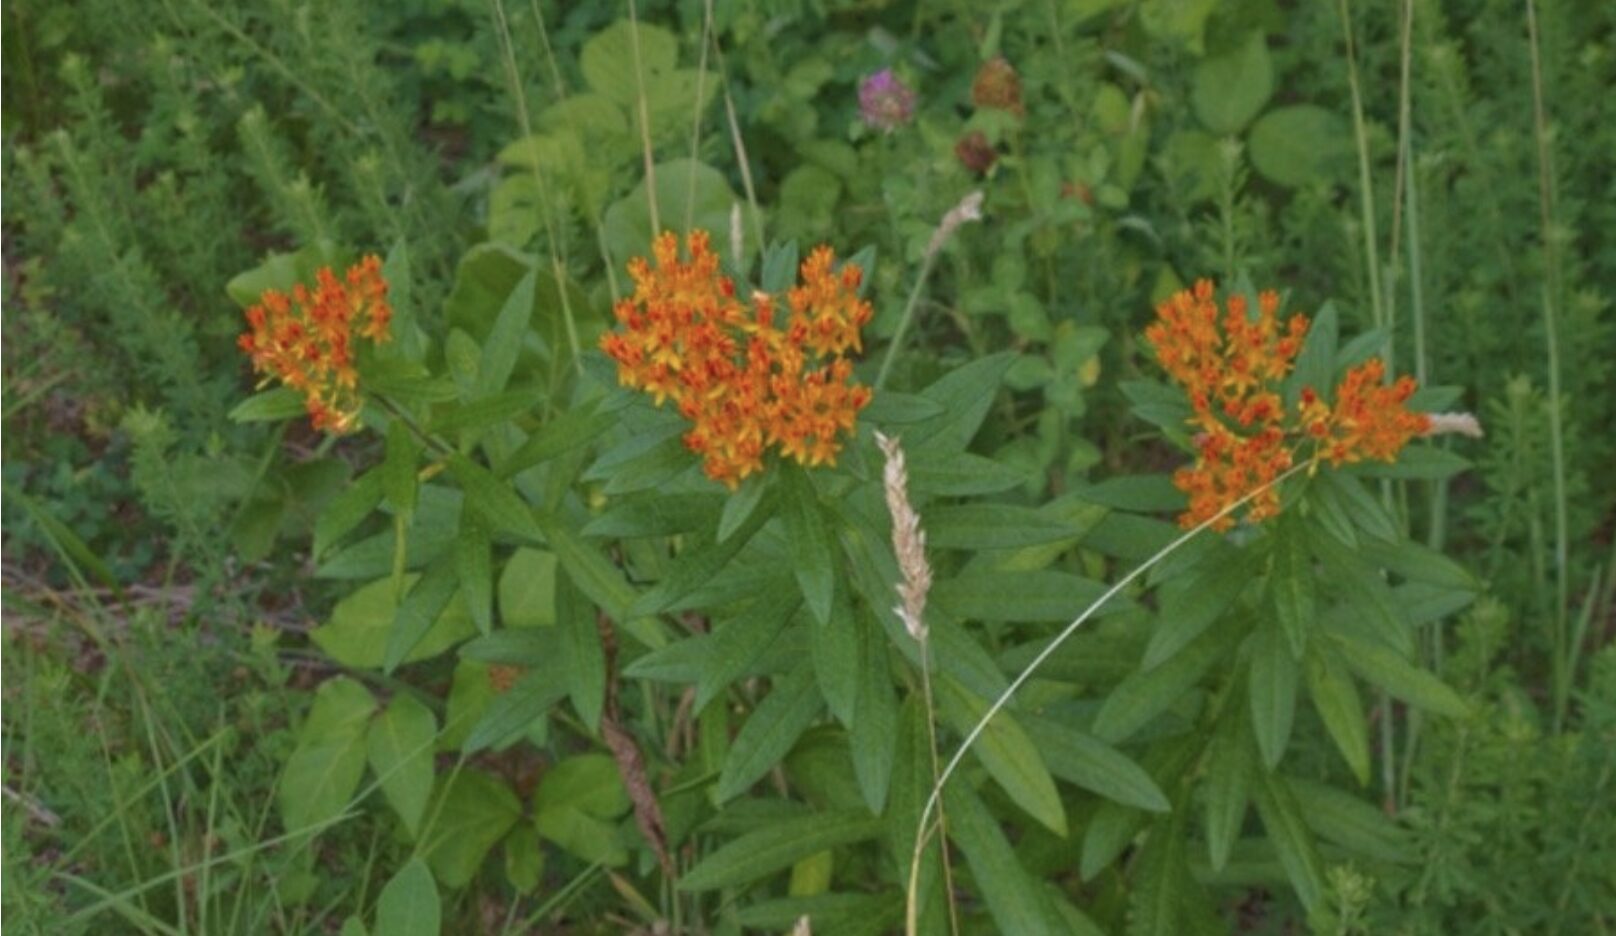 The Powerful Plants of the Short Street Nature Preserve